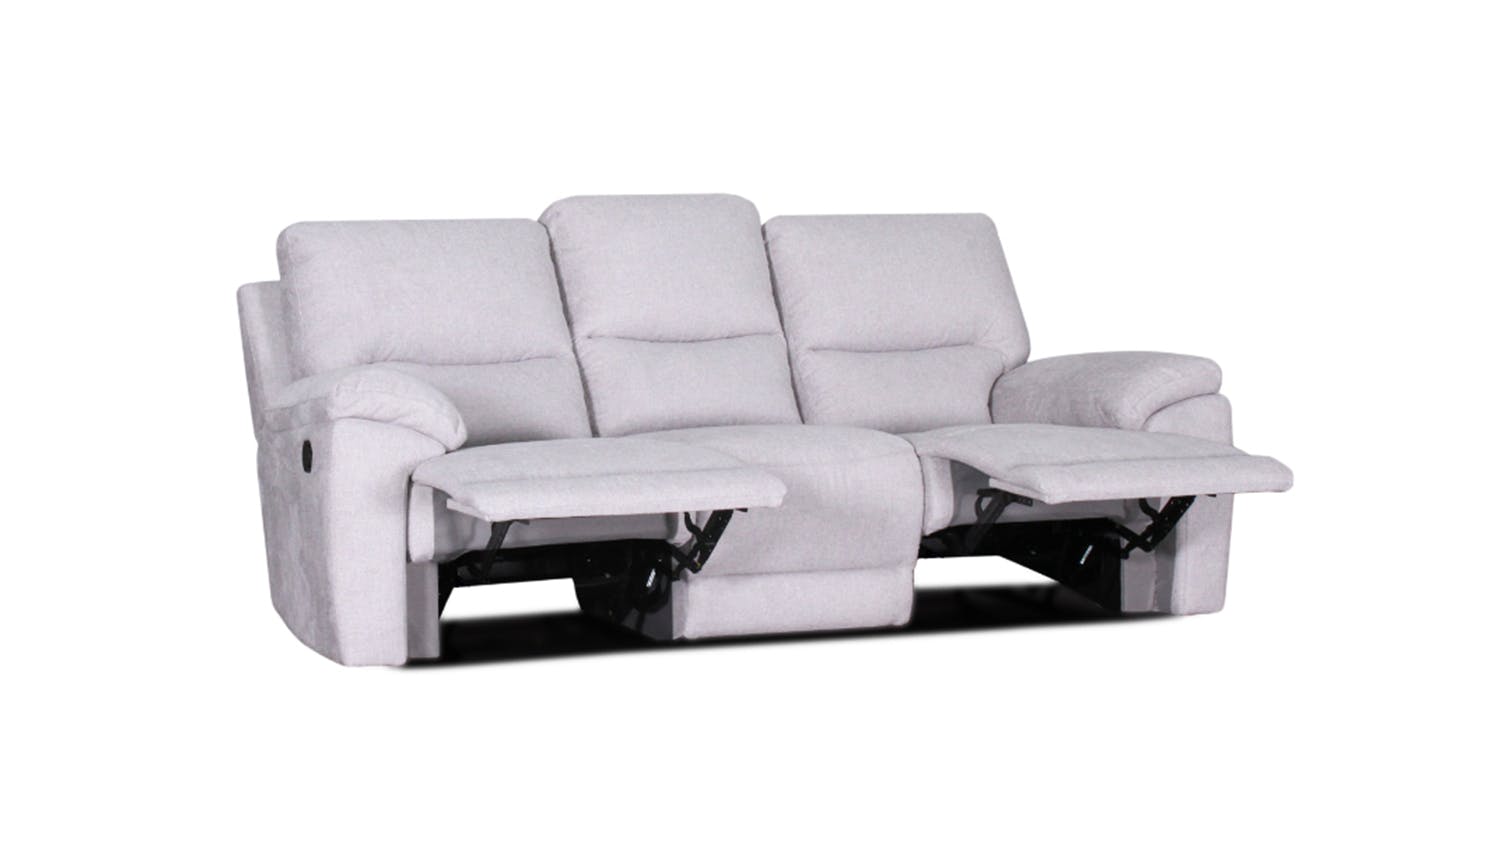 Featherstone 3 Seater Fabric Recliner Sofa